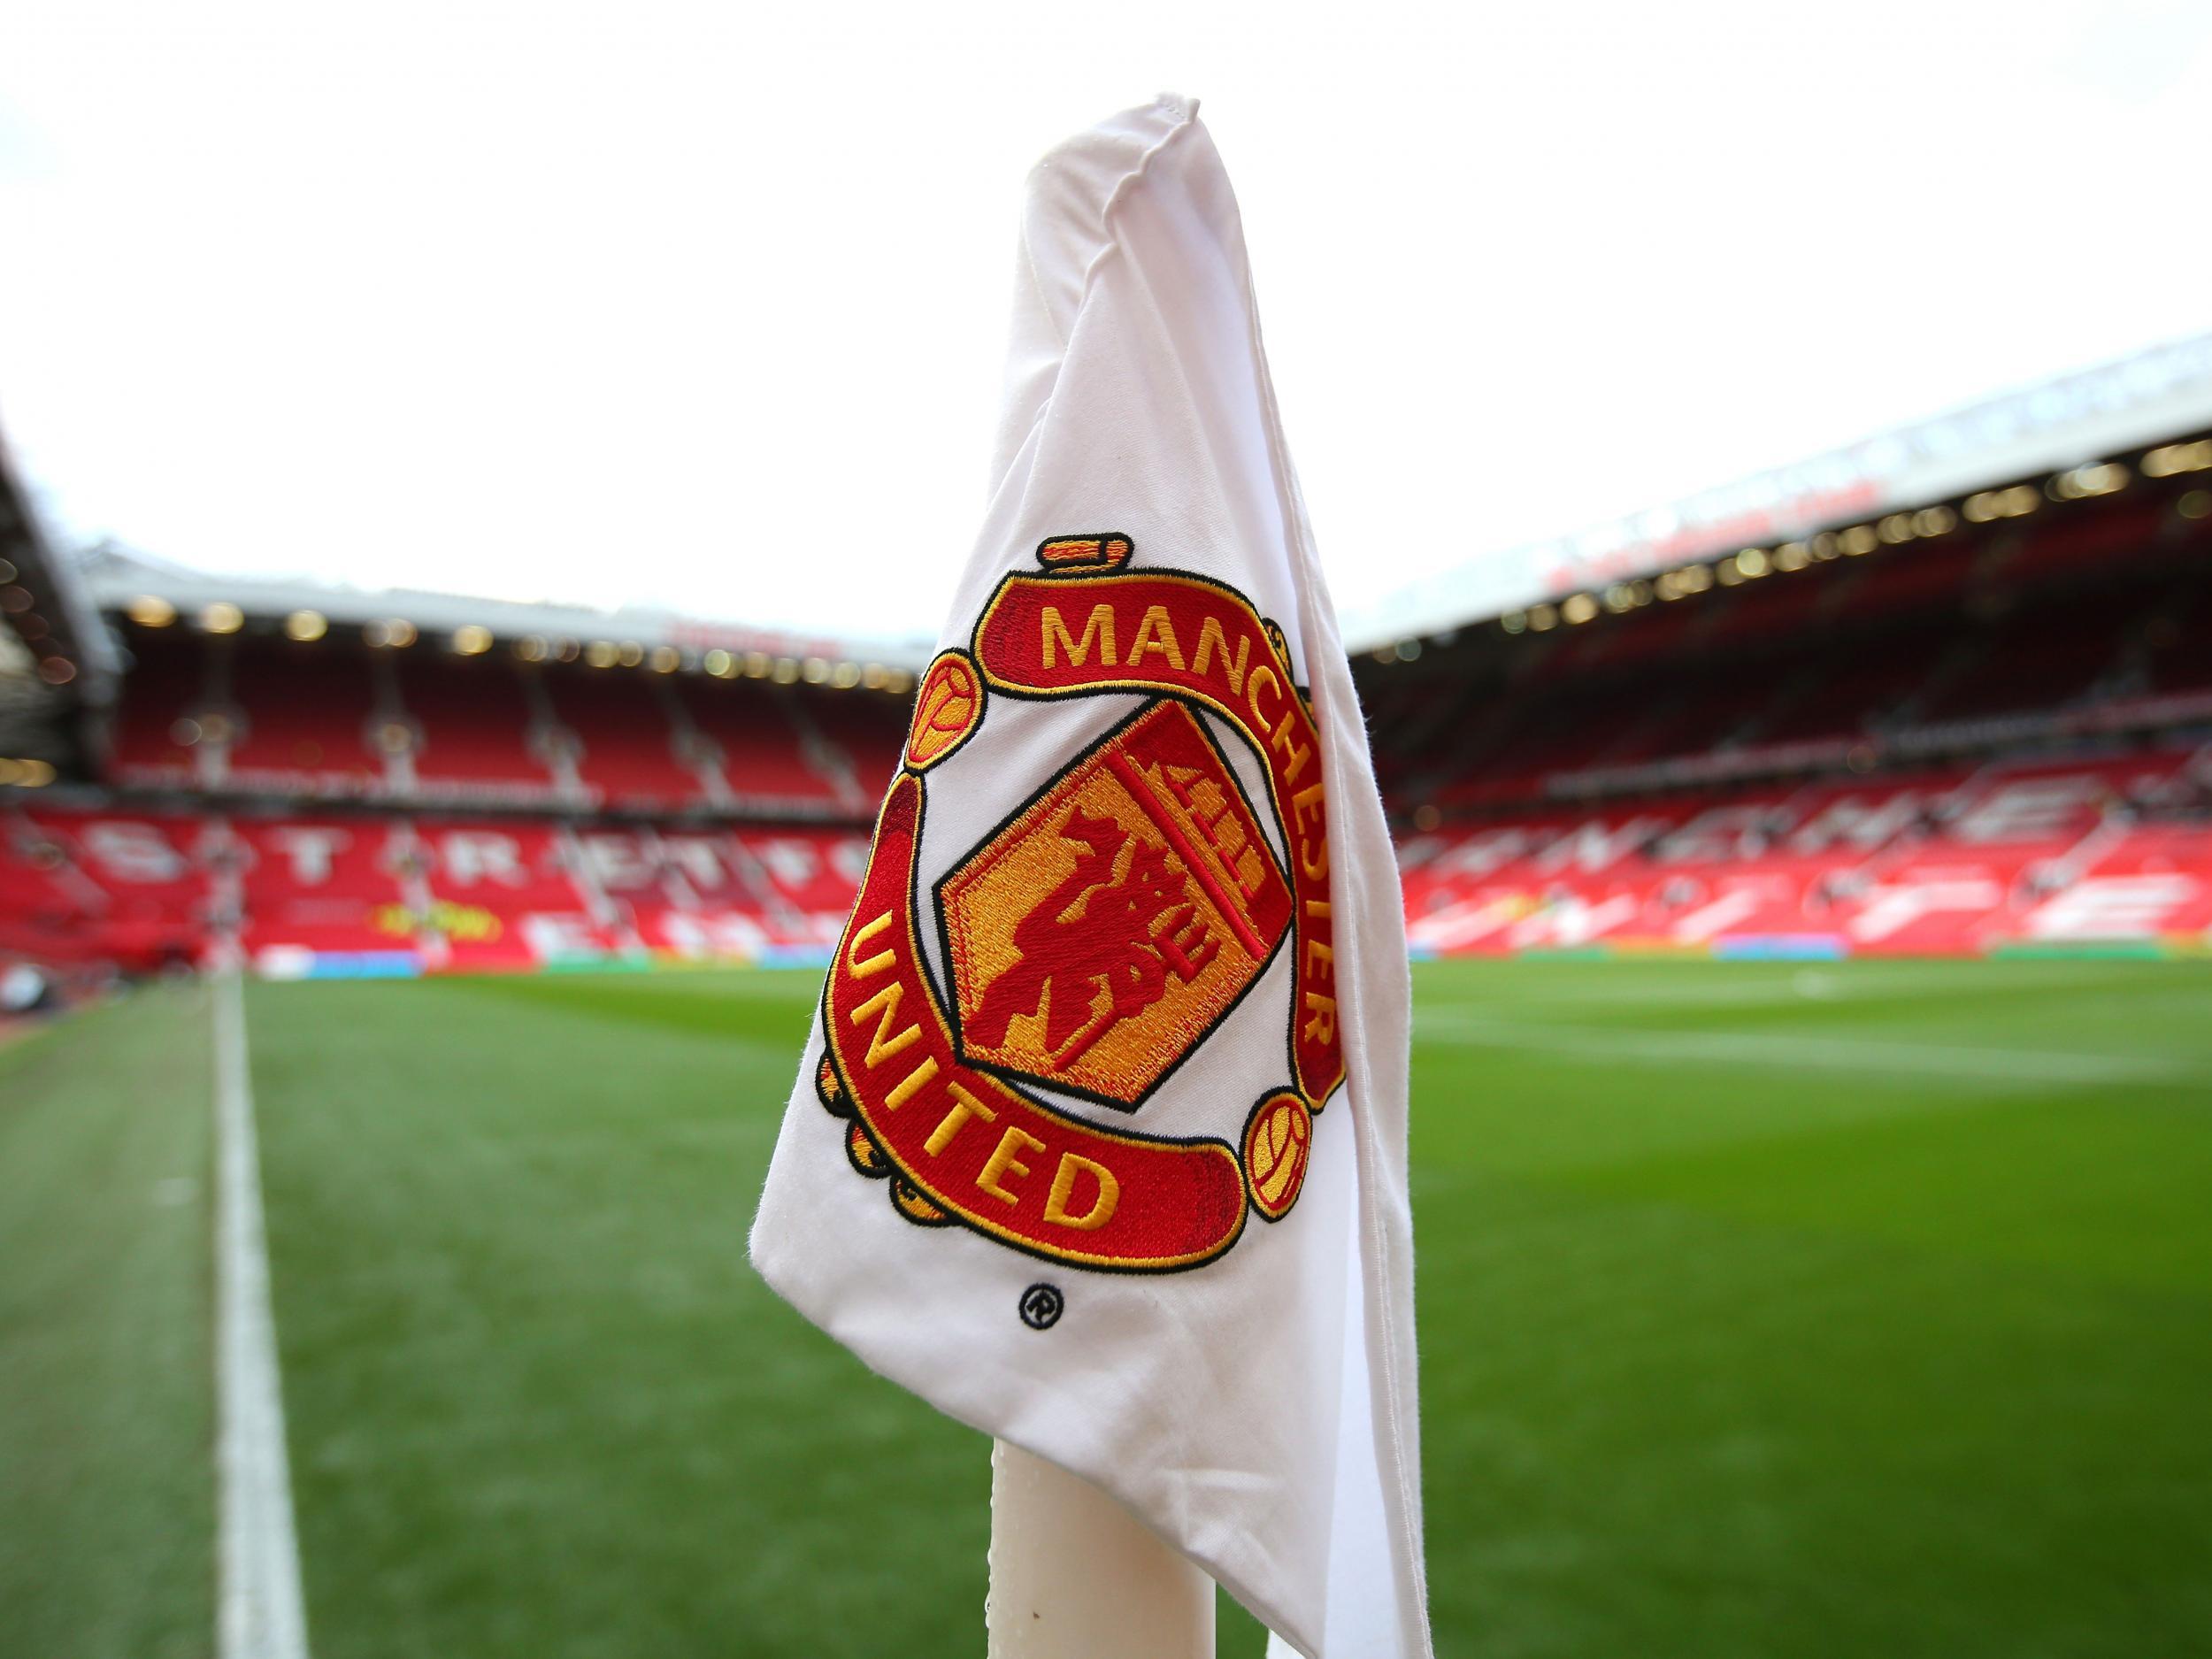 Manchester United announced the plans on Wednesday evening